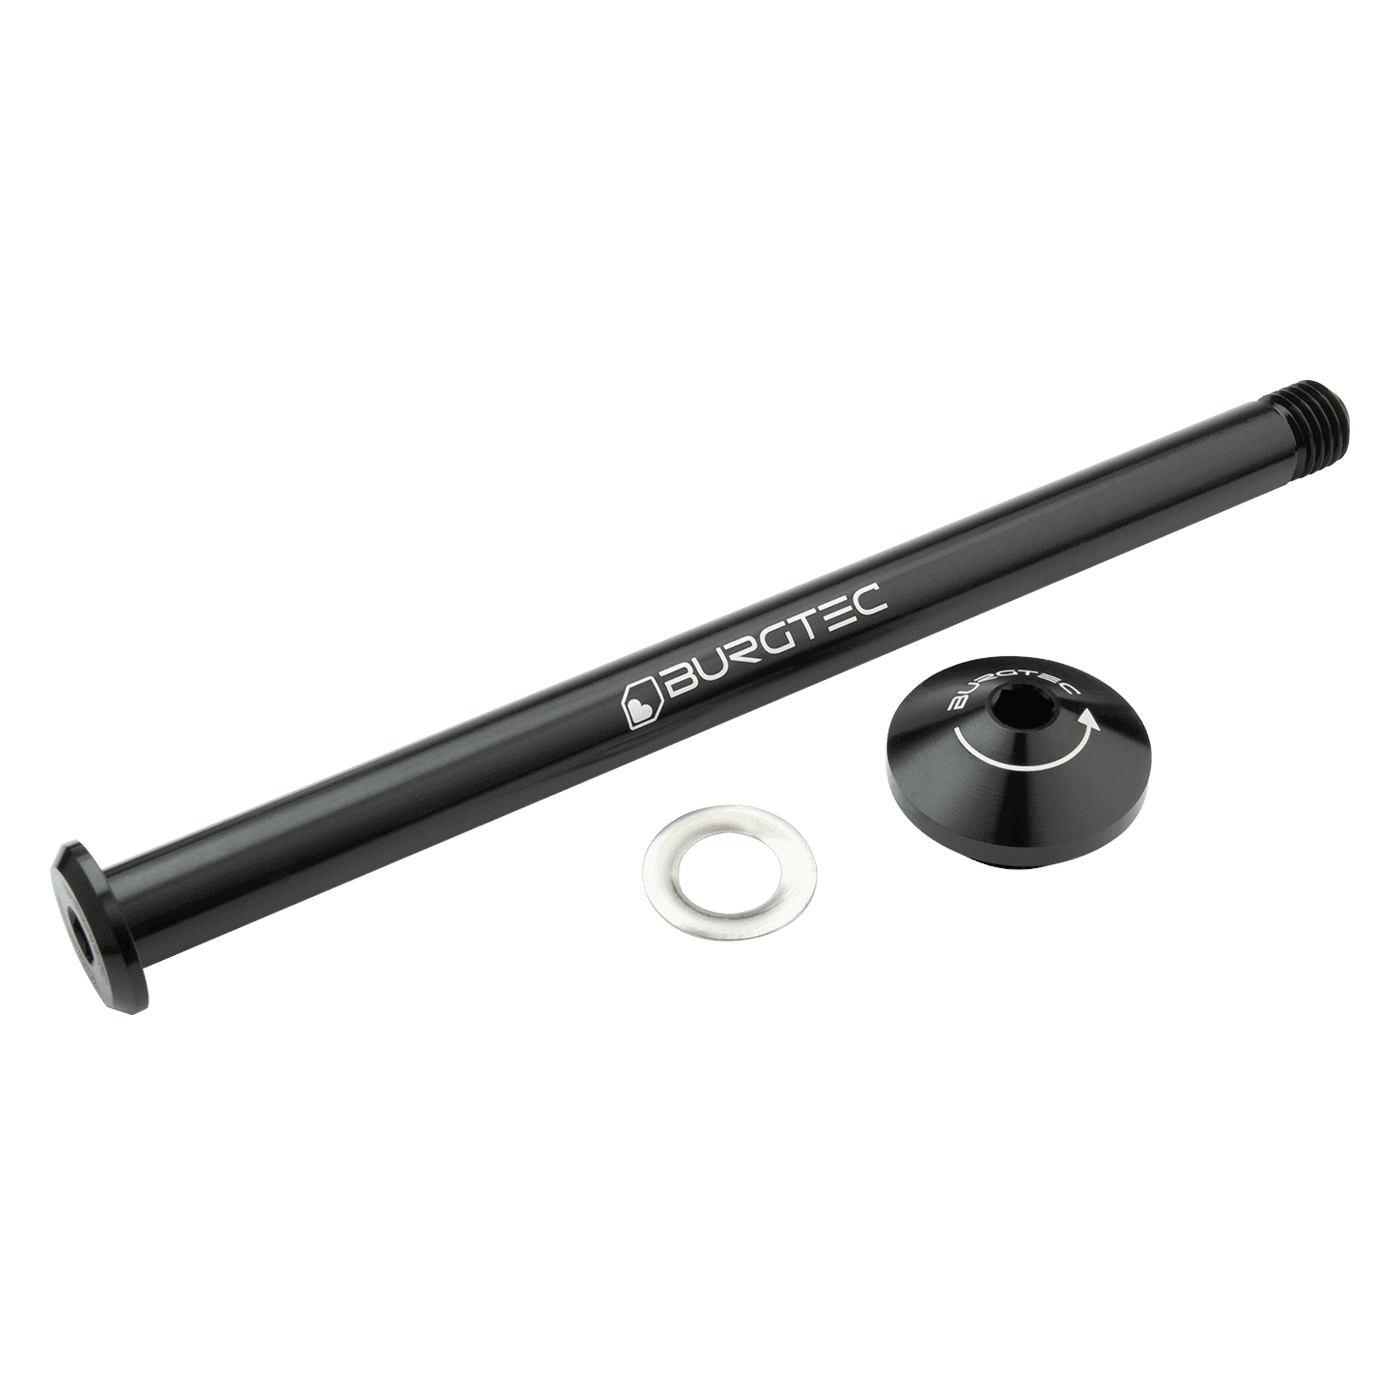 Picture of Burgtec Thru Axle - 12x148mm Boost - for Yeti Rear Dropouts / 171mm - Burgtec Black